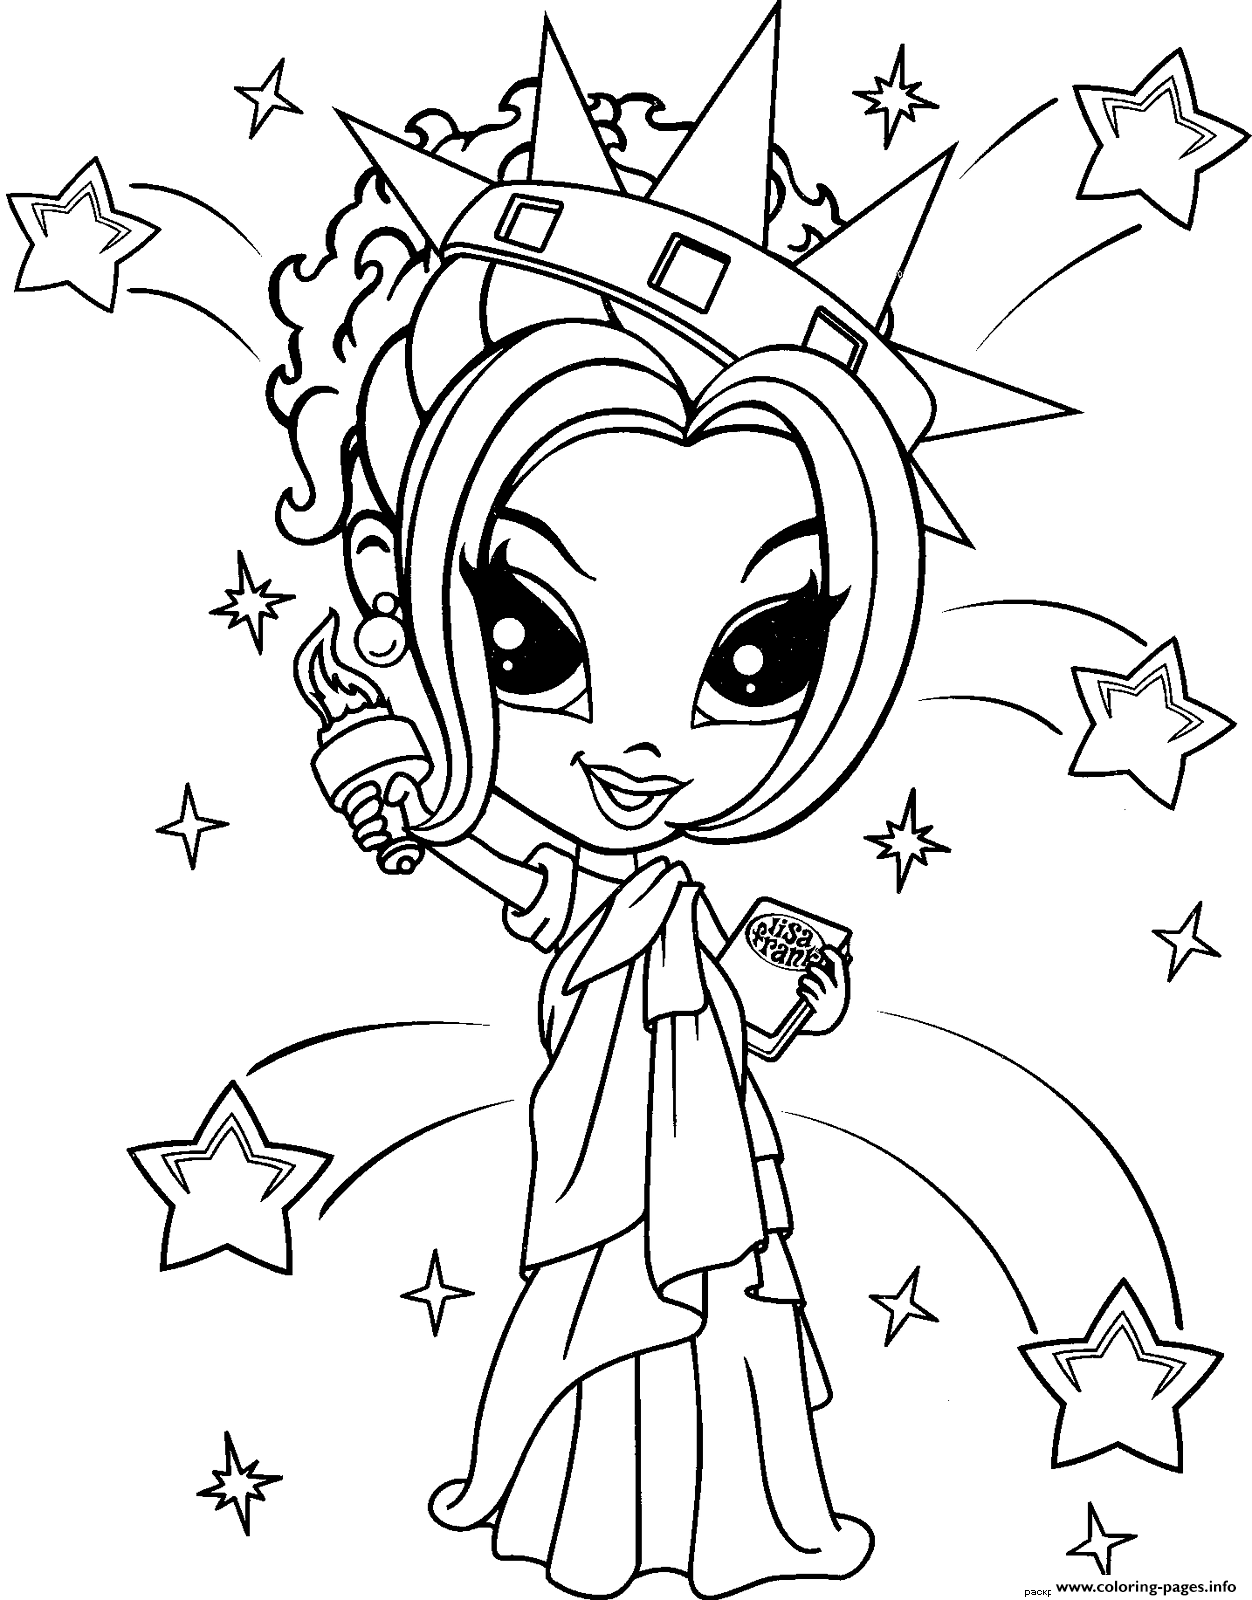 Funny lisa frank coloring pages coloring page printable